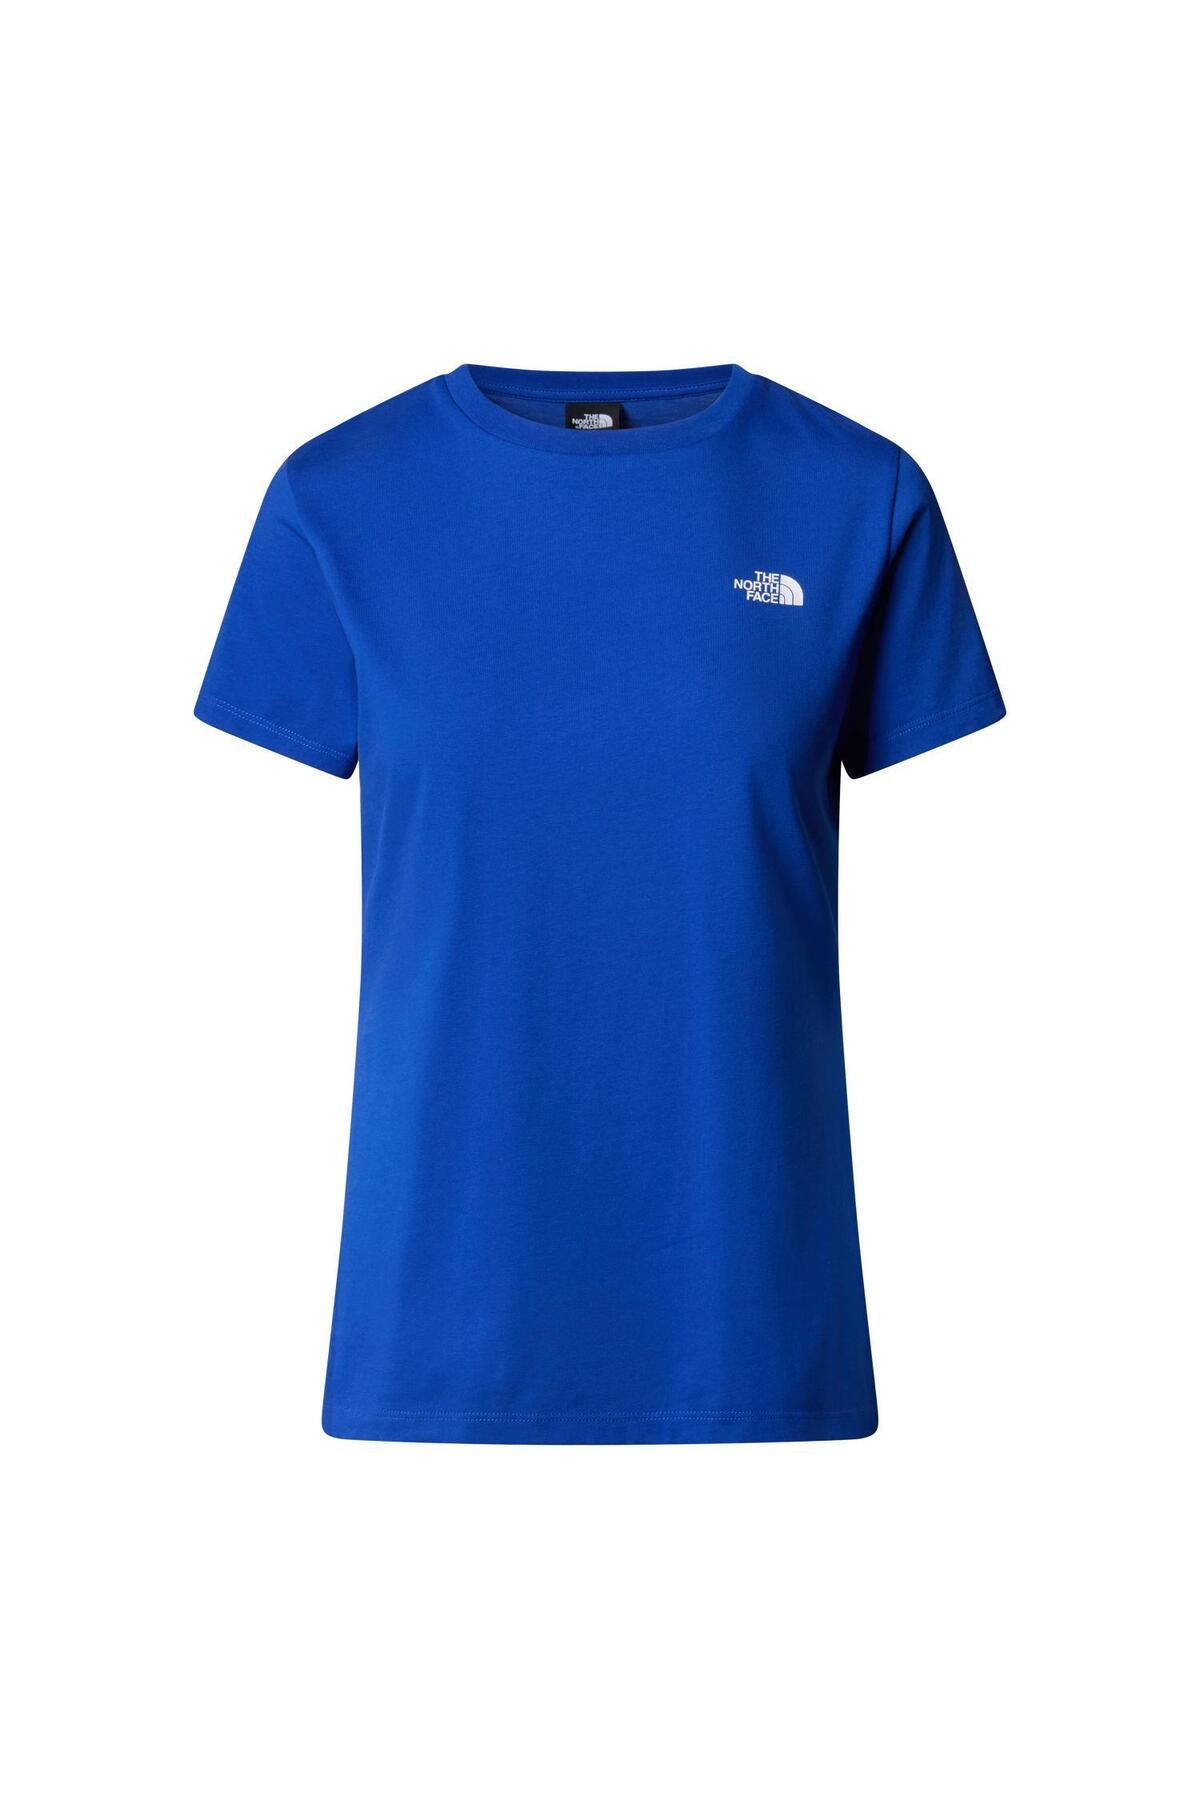 The North Face W S/S SIMPLE DOME SLIM TEE  T-Shirt NF0A87NHCZ61 Mavi-M